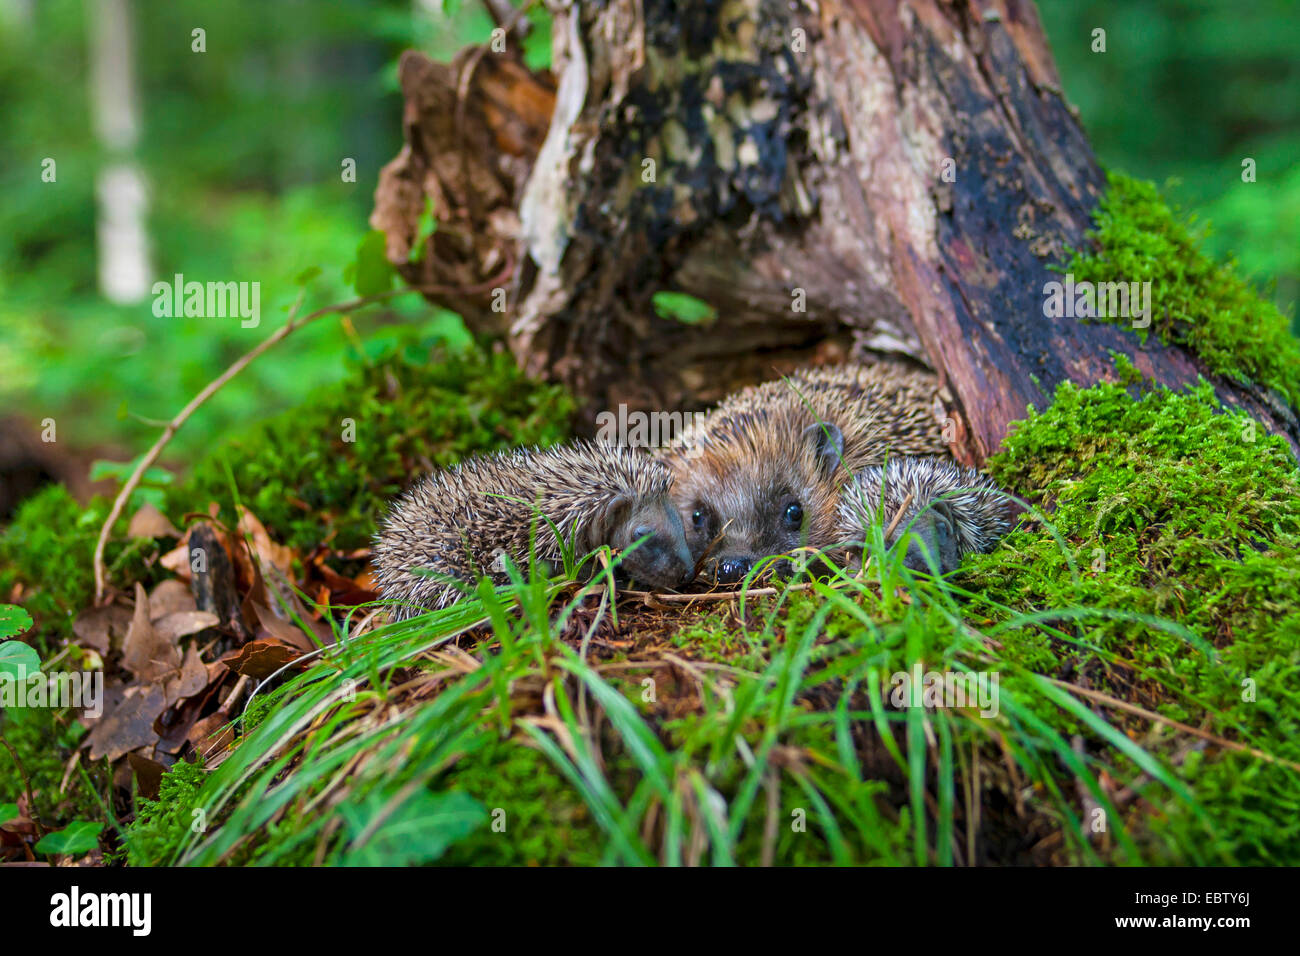 Western hedgehog, European hedgehog (Erinaceus europaeus), mother hedgehog with two young children at the entrance of its den, a mossy tree stump, Switzerland, Sankt Gallen Stock Photo